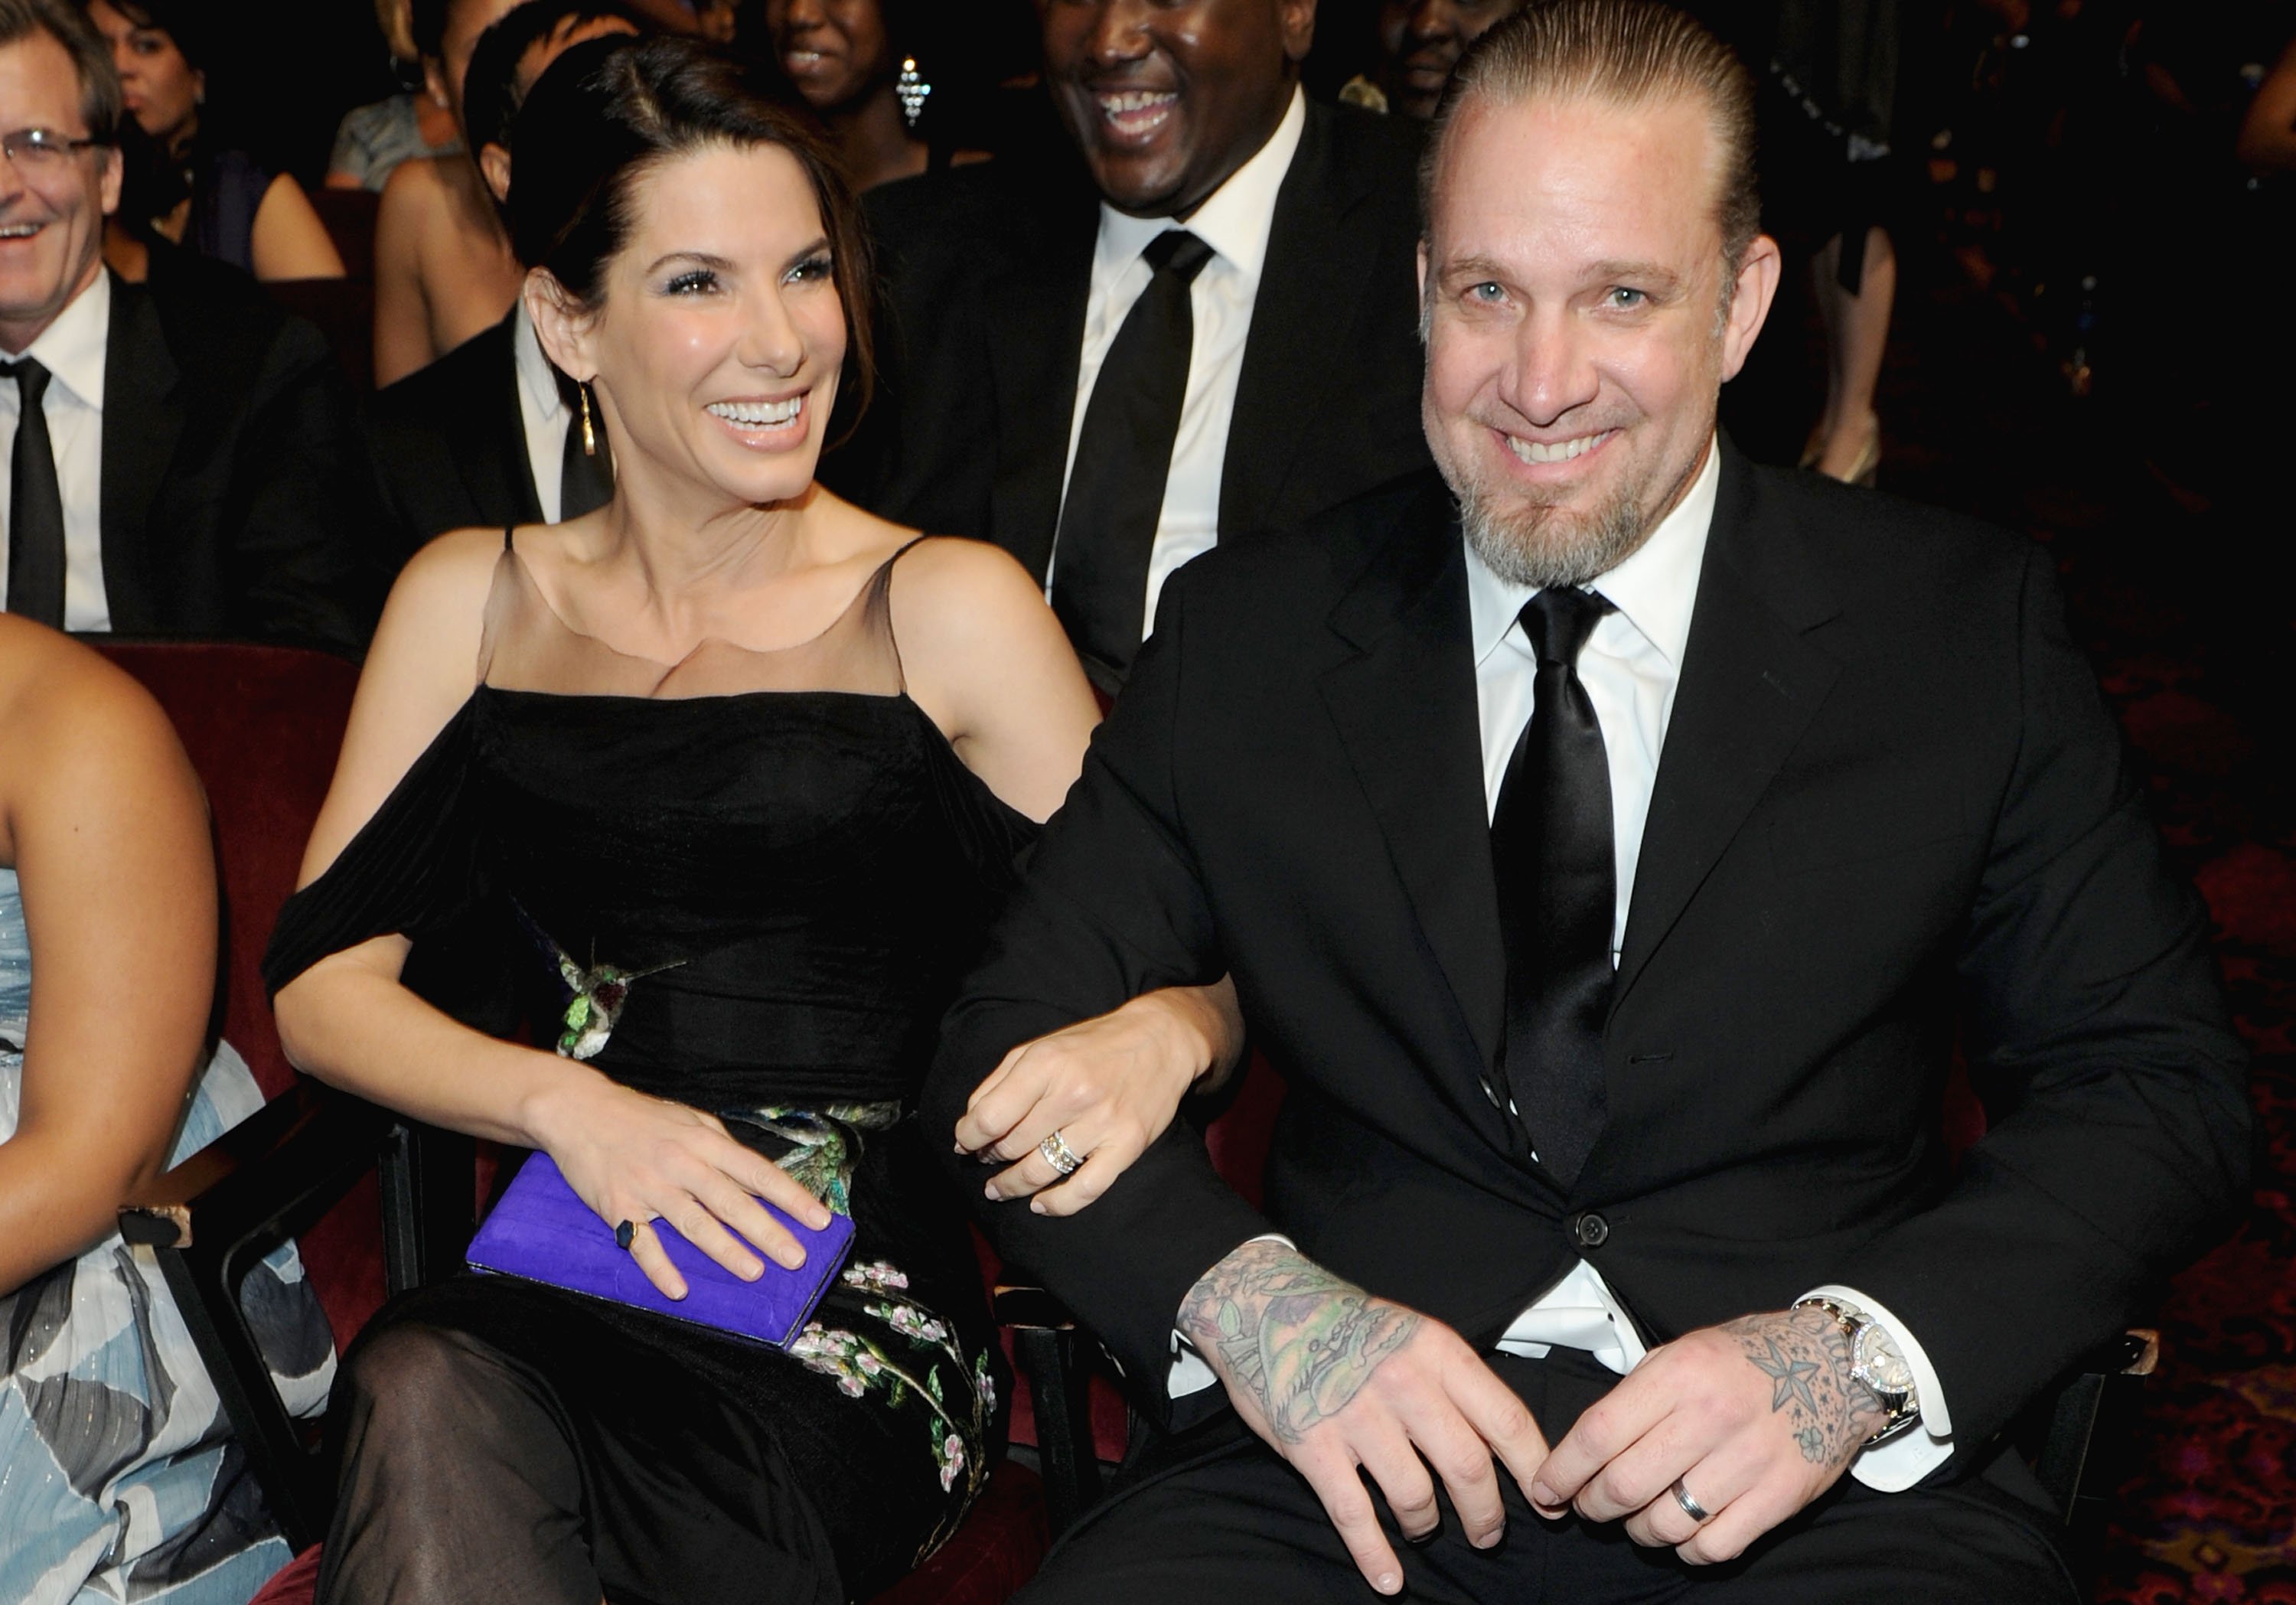 Actress Sandra Bullock and Jesse James in the audience during the 41st NAACP Image awards held at The Shrine Auditorium on February 26, 2010 in Los Angeles, California. | Source: Getty Images